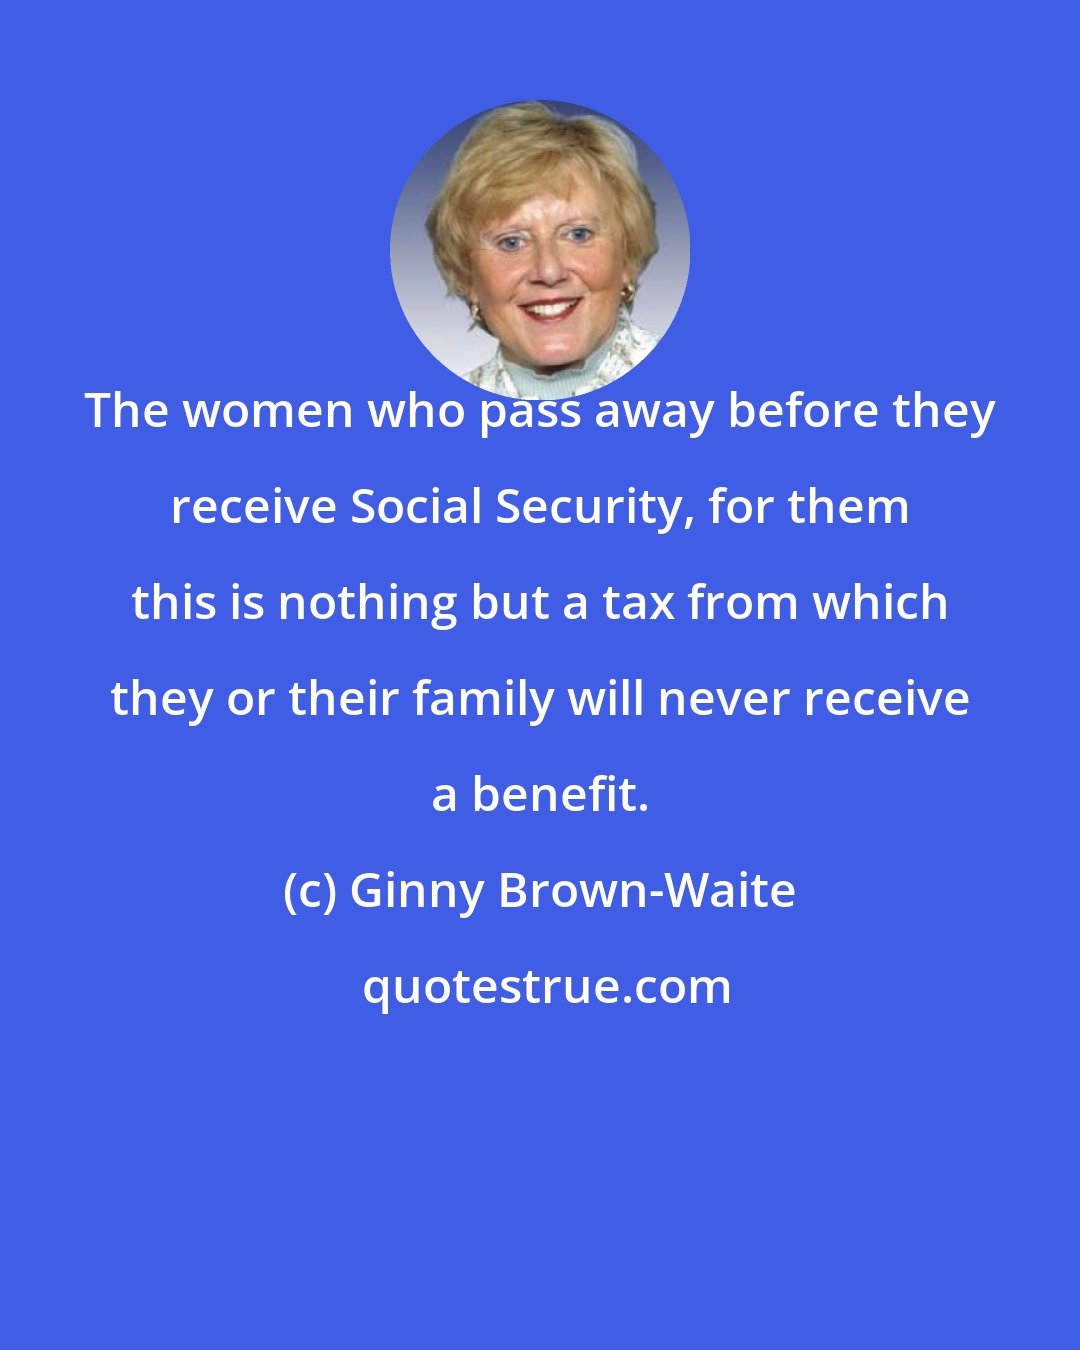 Ginny Brown-Waite: The women who pass away before they receive Social Security, for them this is nothing but a tax from which they or their family will never receive a benefit.